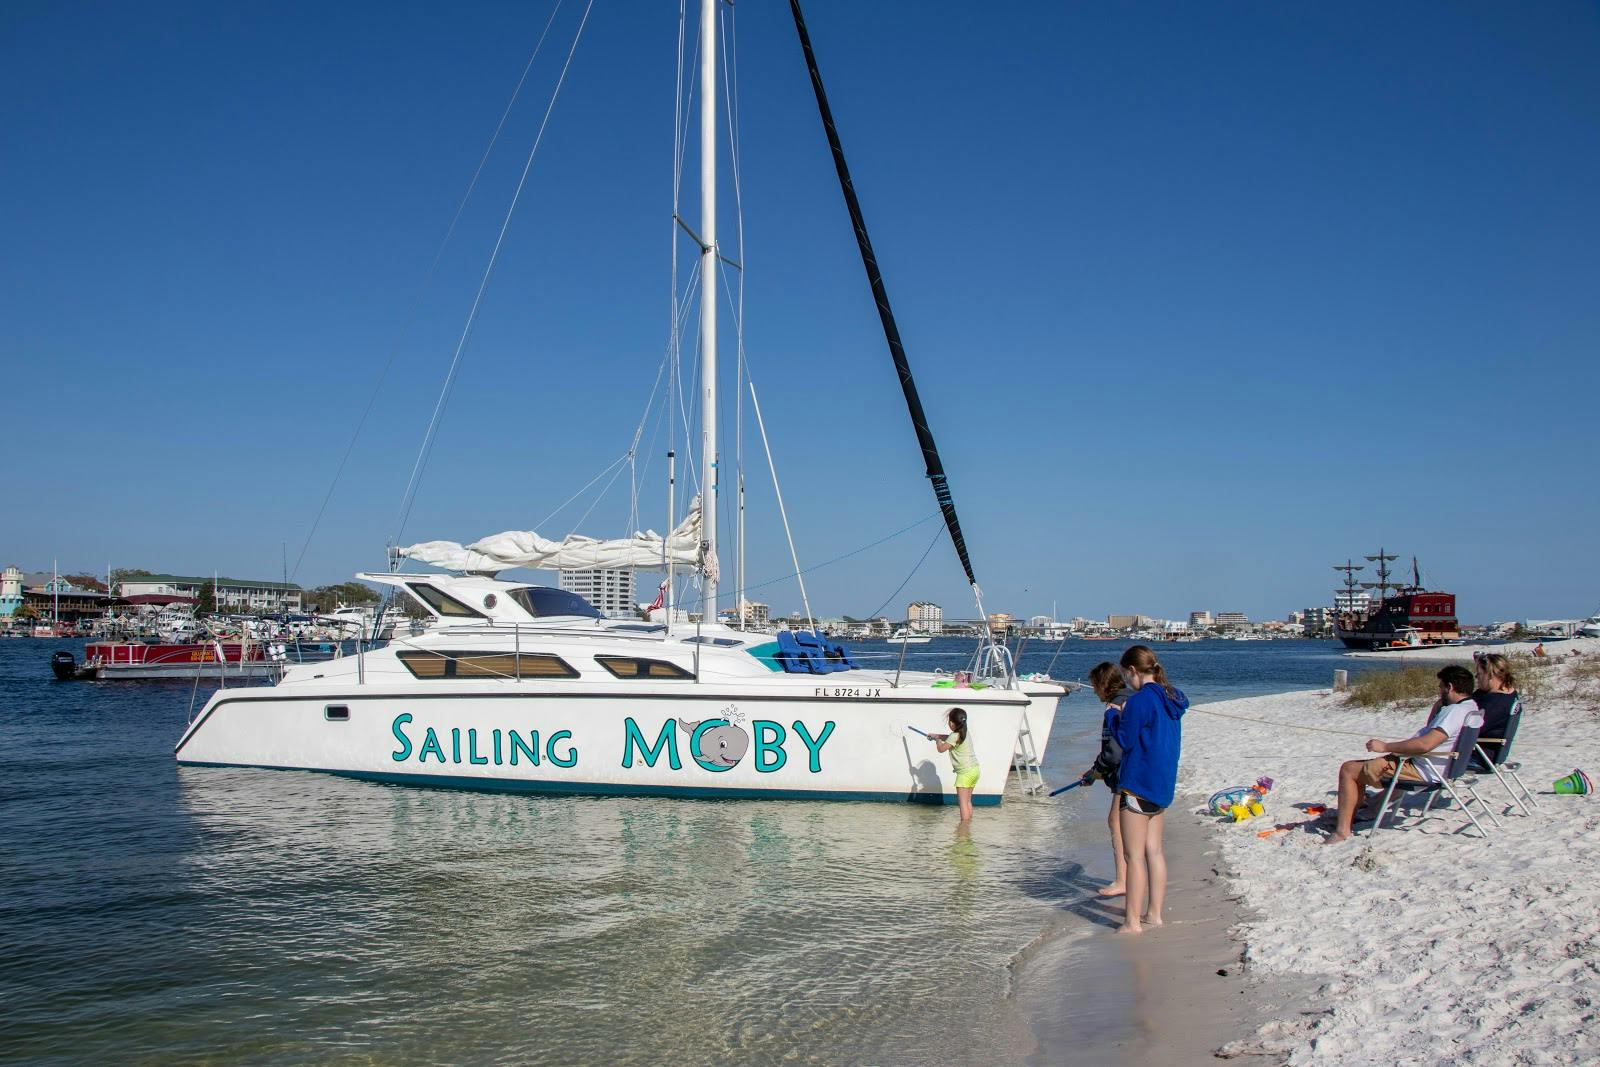 Image - Sailing Moby Adventures